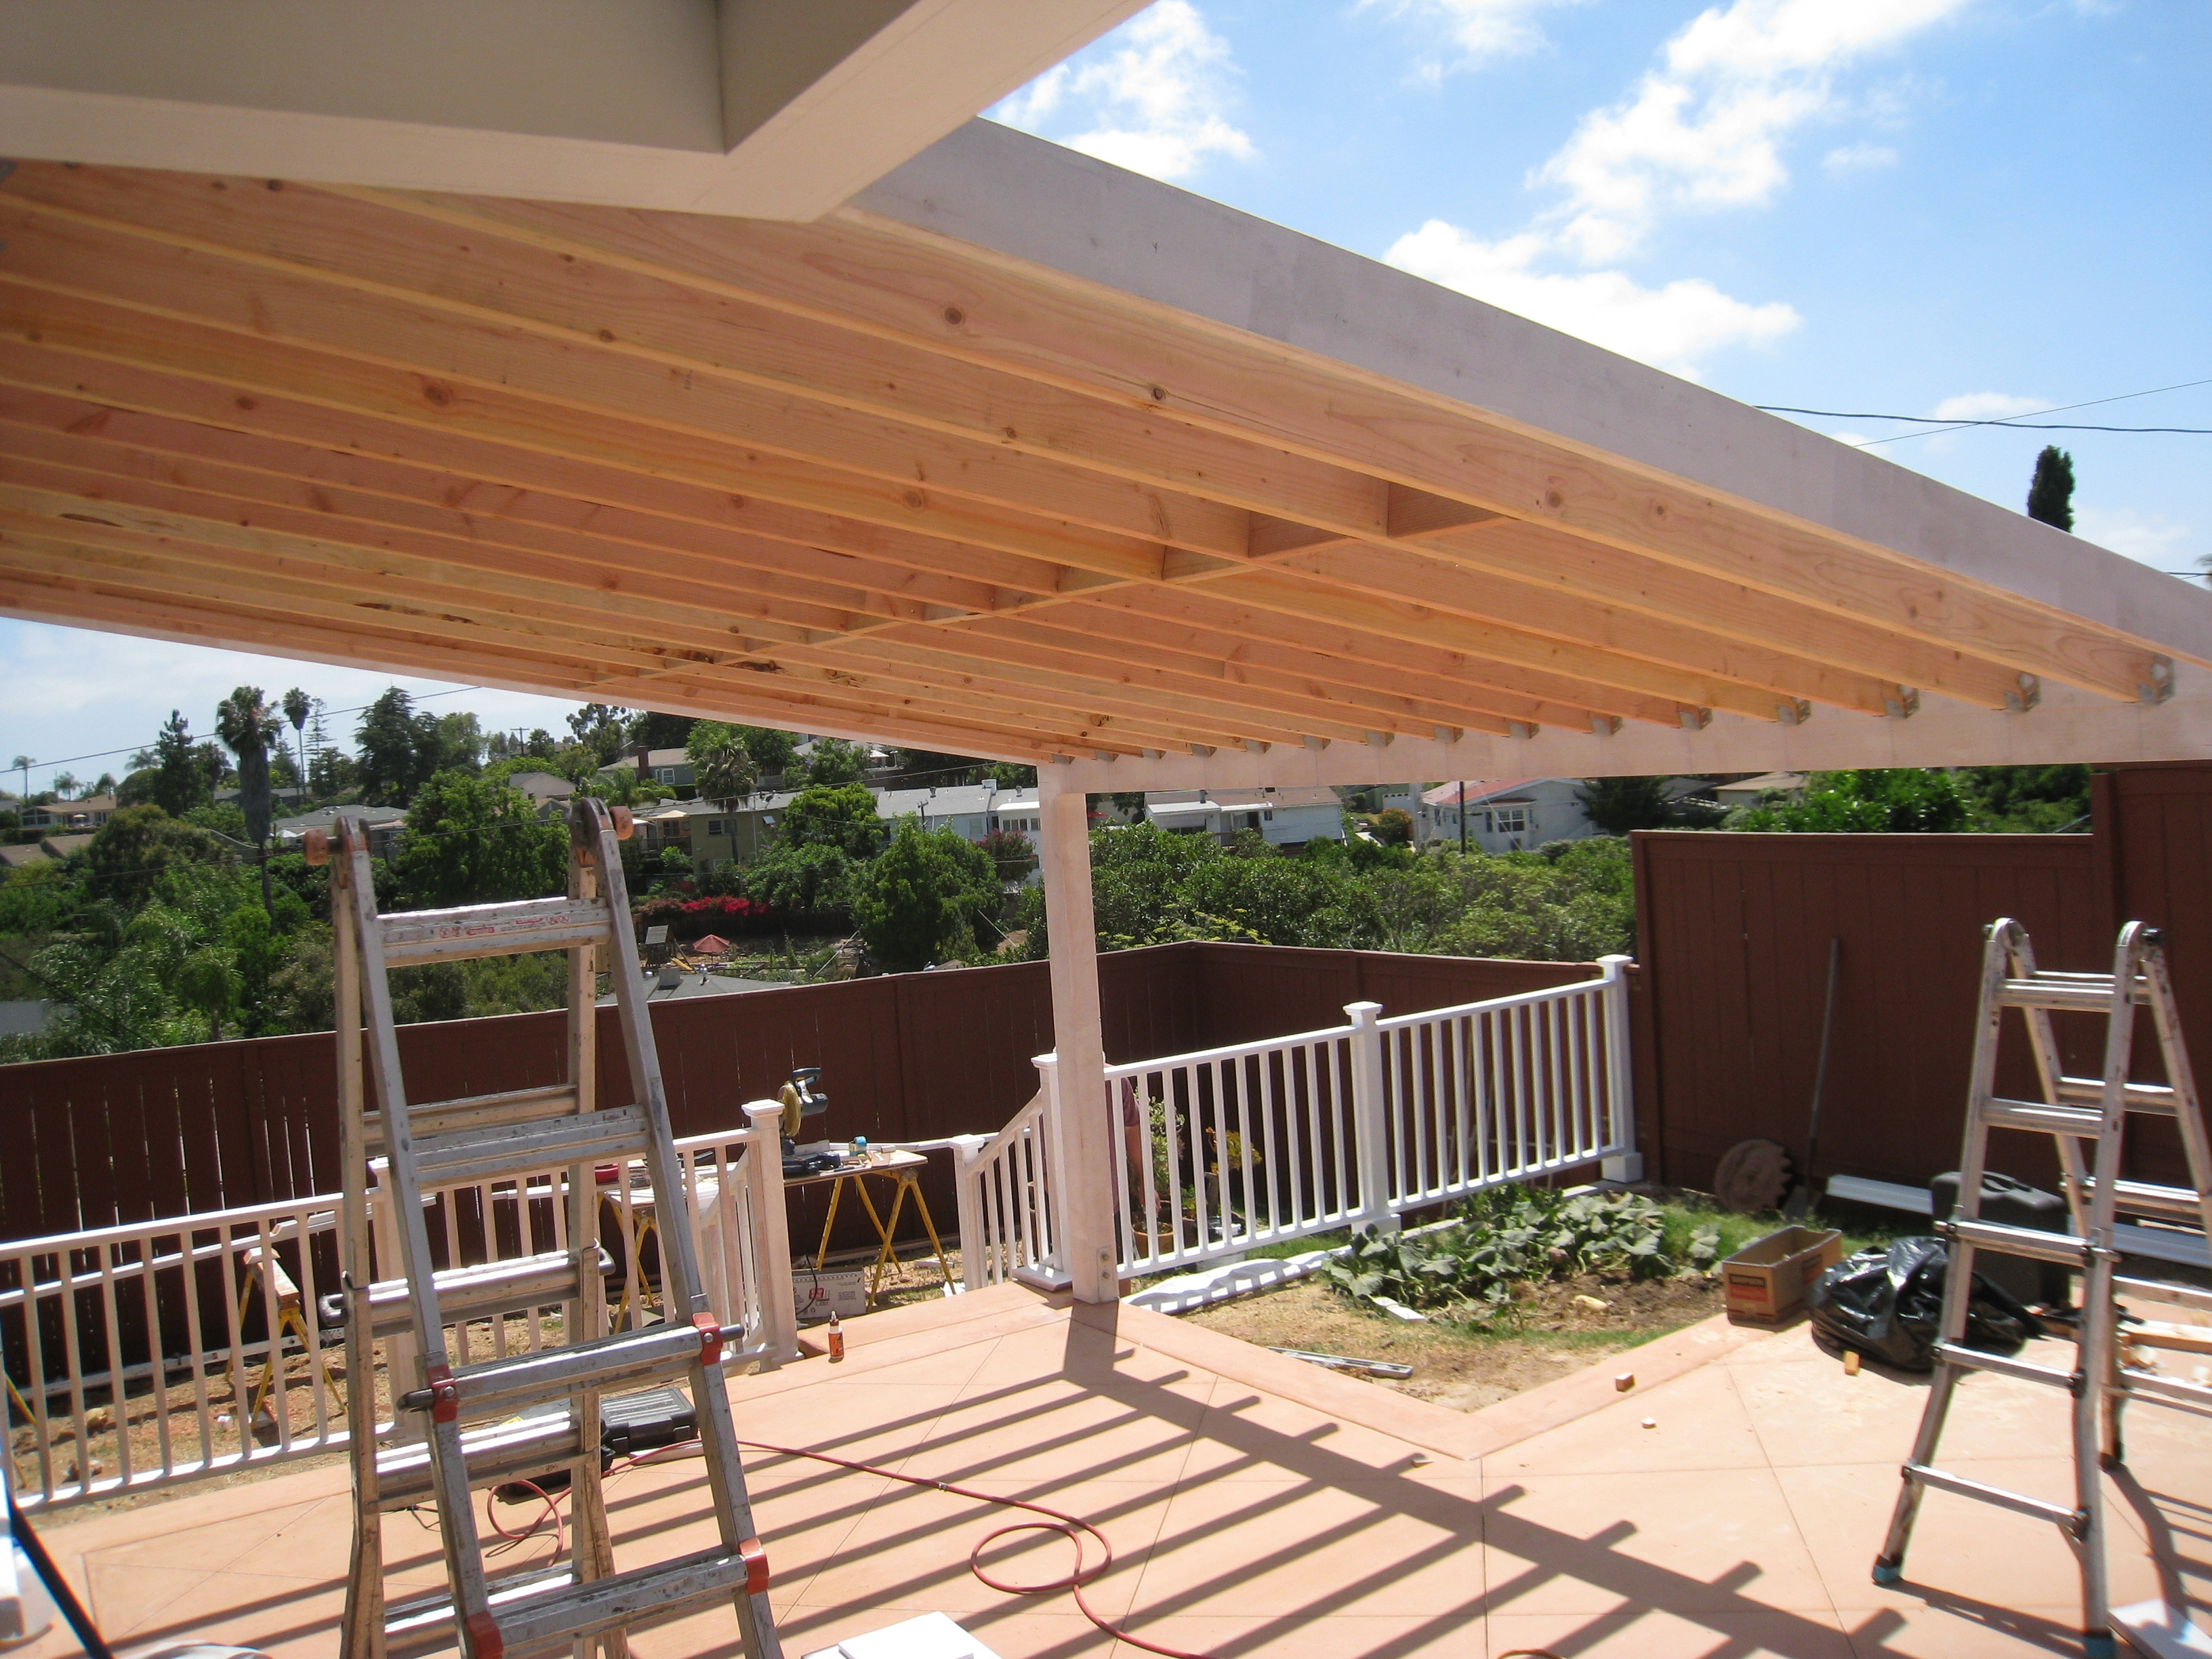 Shade Aluminum Patio Covered Covers Small Bellflower throughout proportions 3264 X 2448